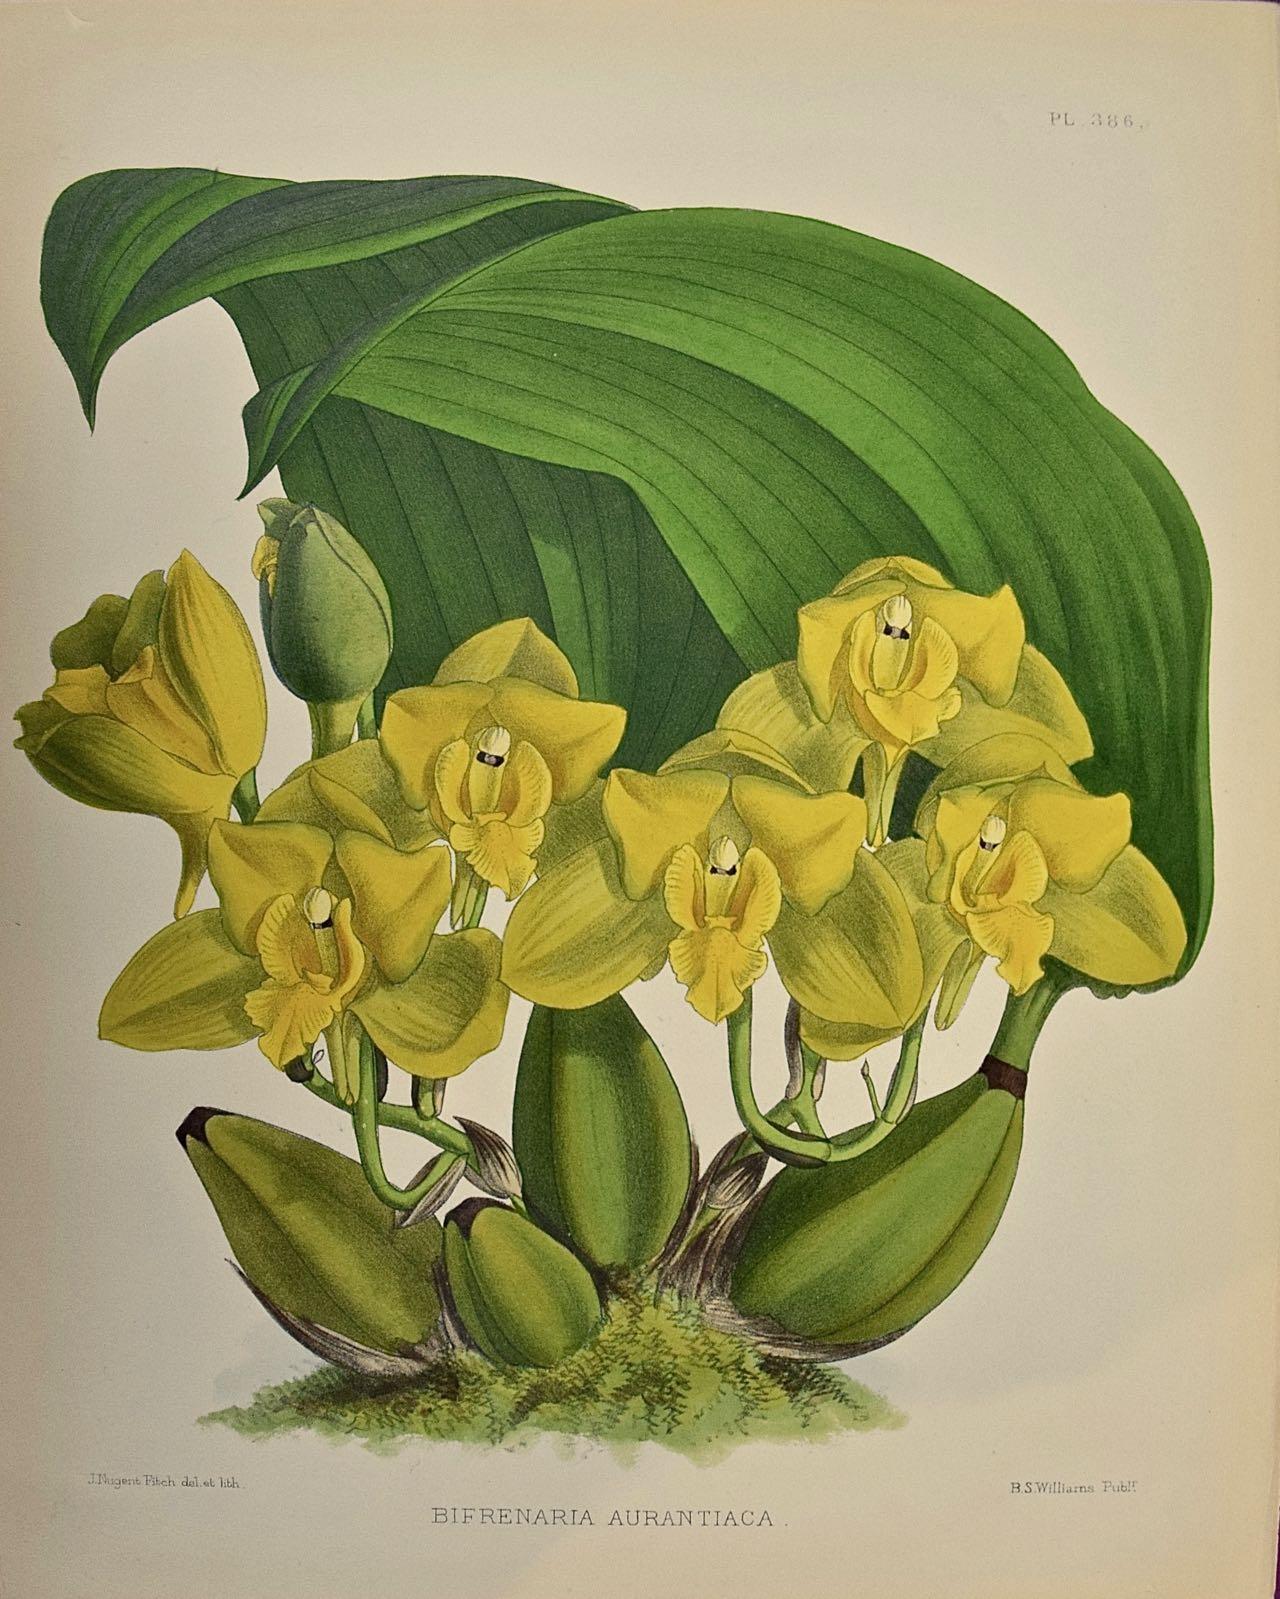 John Nugent Fitch Landscape Print - 19th Century Colored Engraving of Orchids "Bifrenaria Aurantiaca" by John Fitch